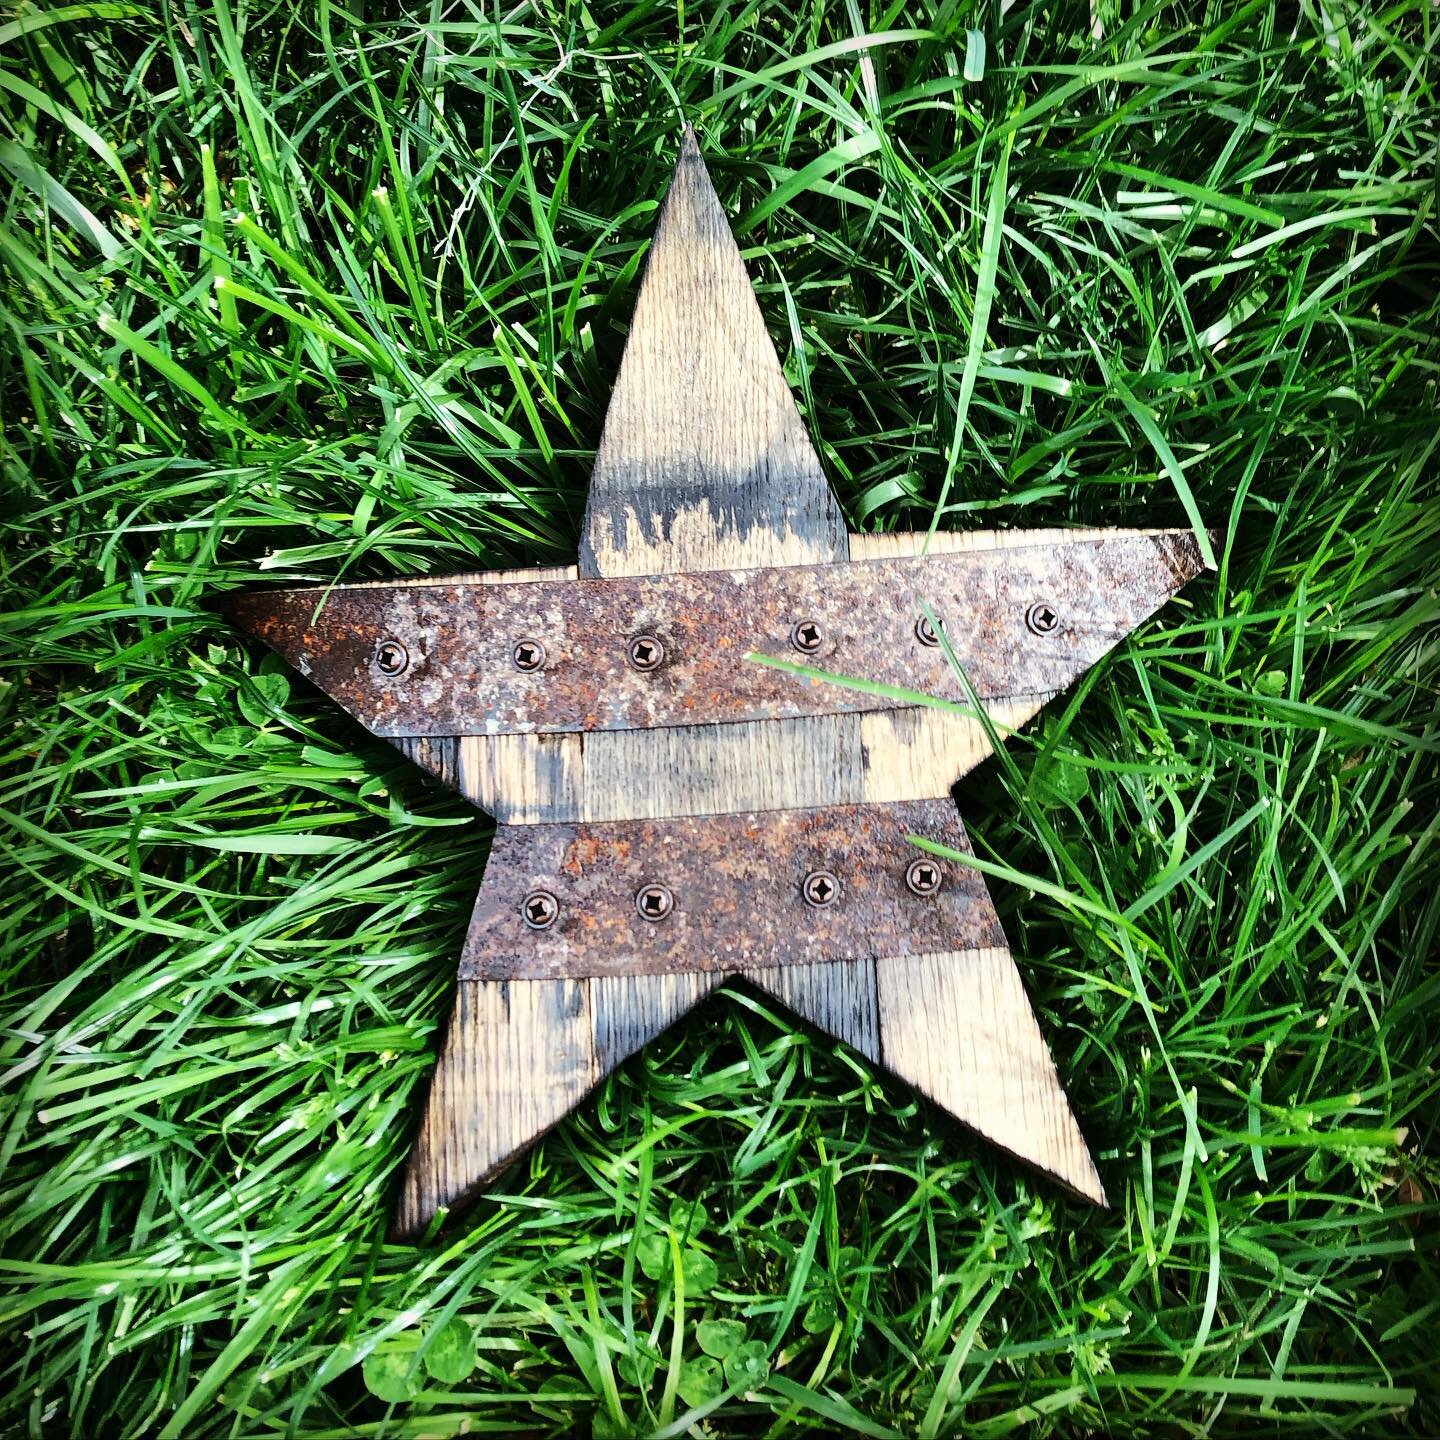 New 1&rsquo; bourbon barrel stars are available today!  More new pieces to come later this week. Remember to like and share. www.stonewallsstudio.com

#homedecor #interiordesign #sharethelex #interior #decor #design #homedesign #handmade #homesweetho